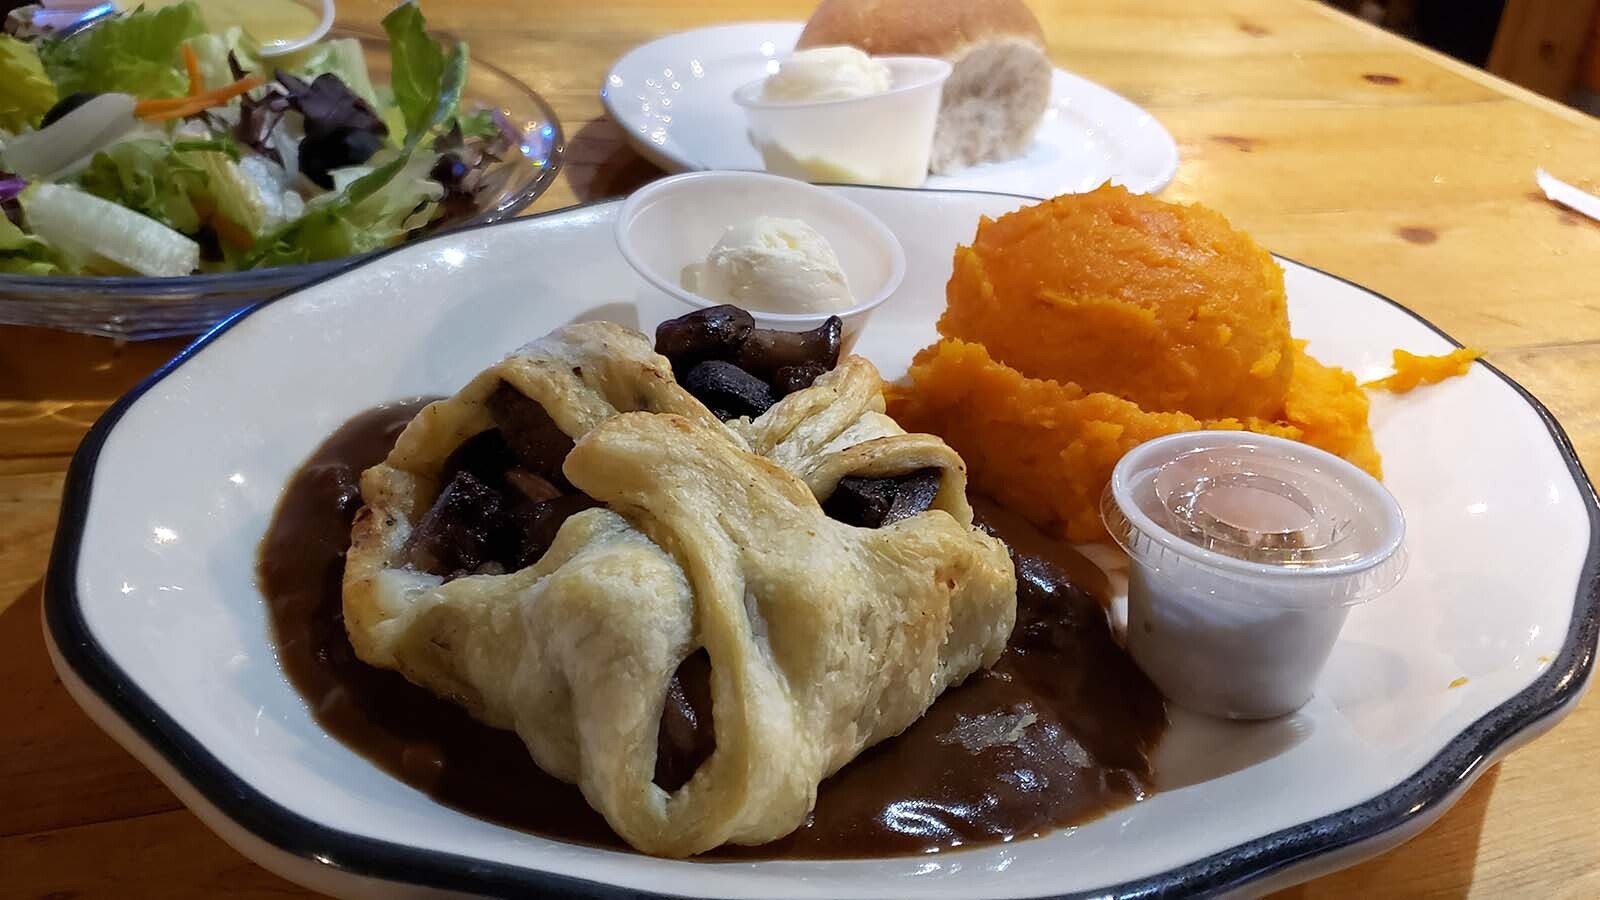 The beef Wellington with a side of sweet potatoes comes with a salad and roll.